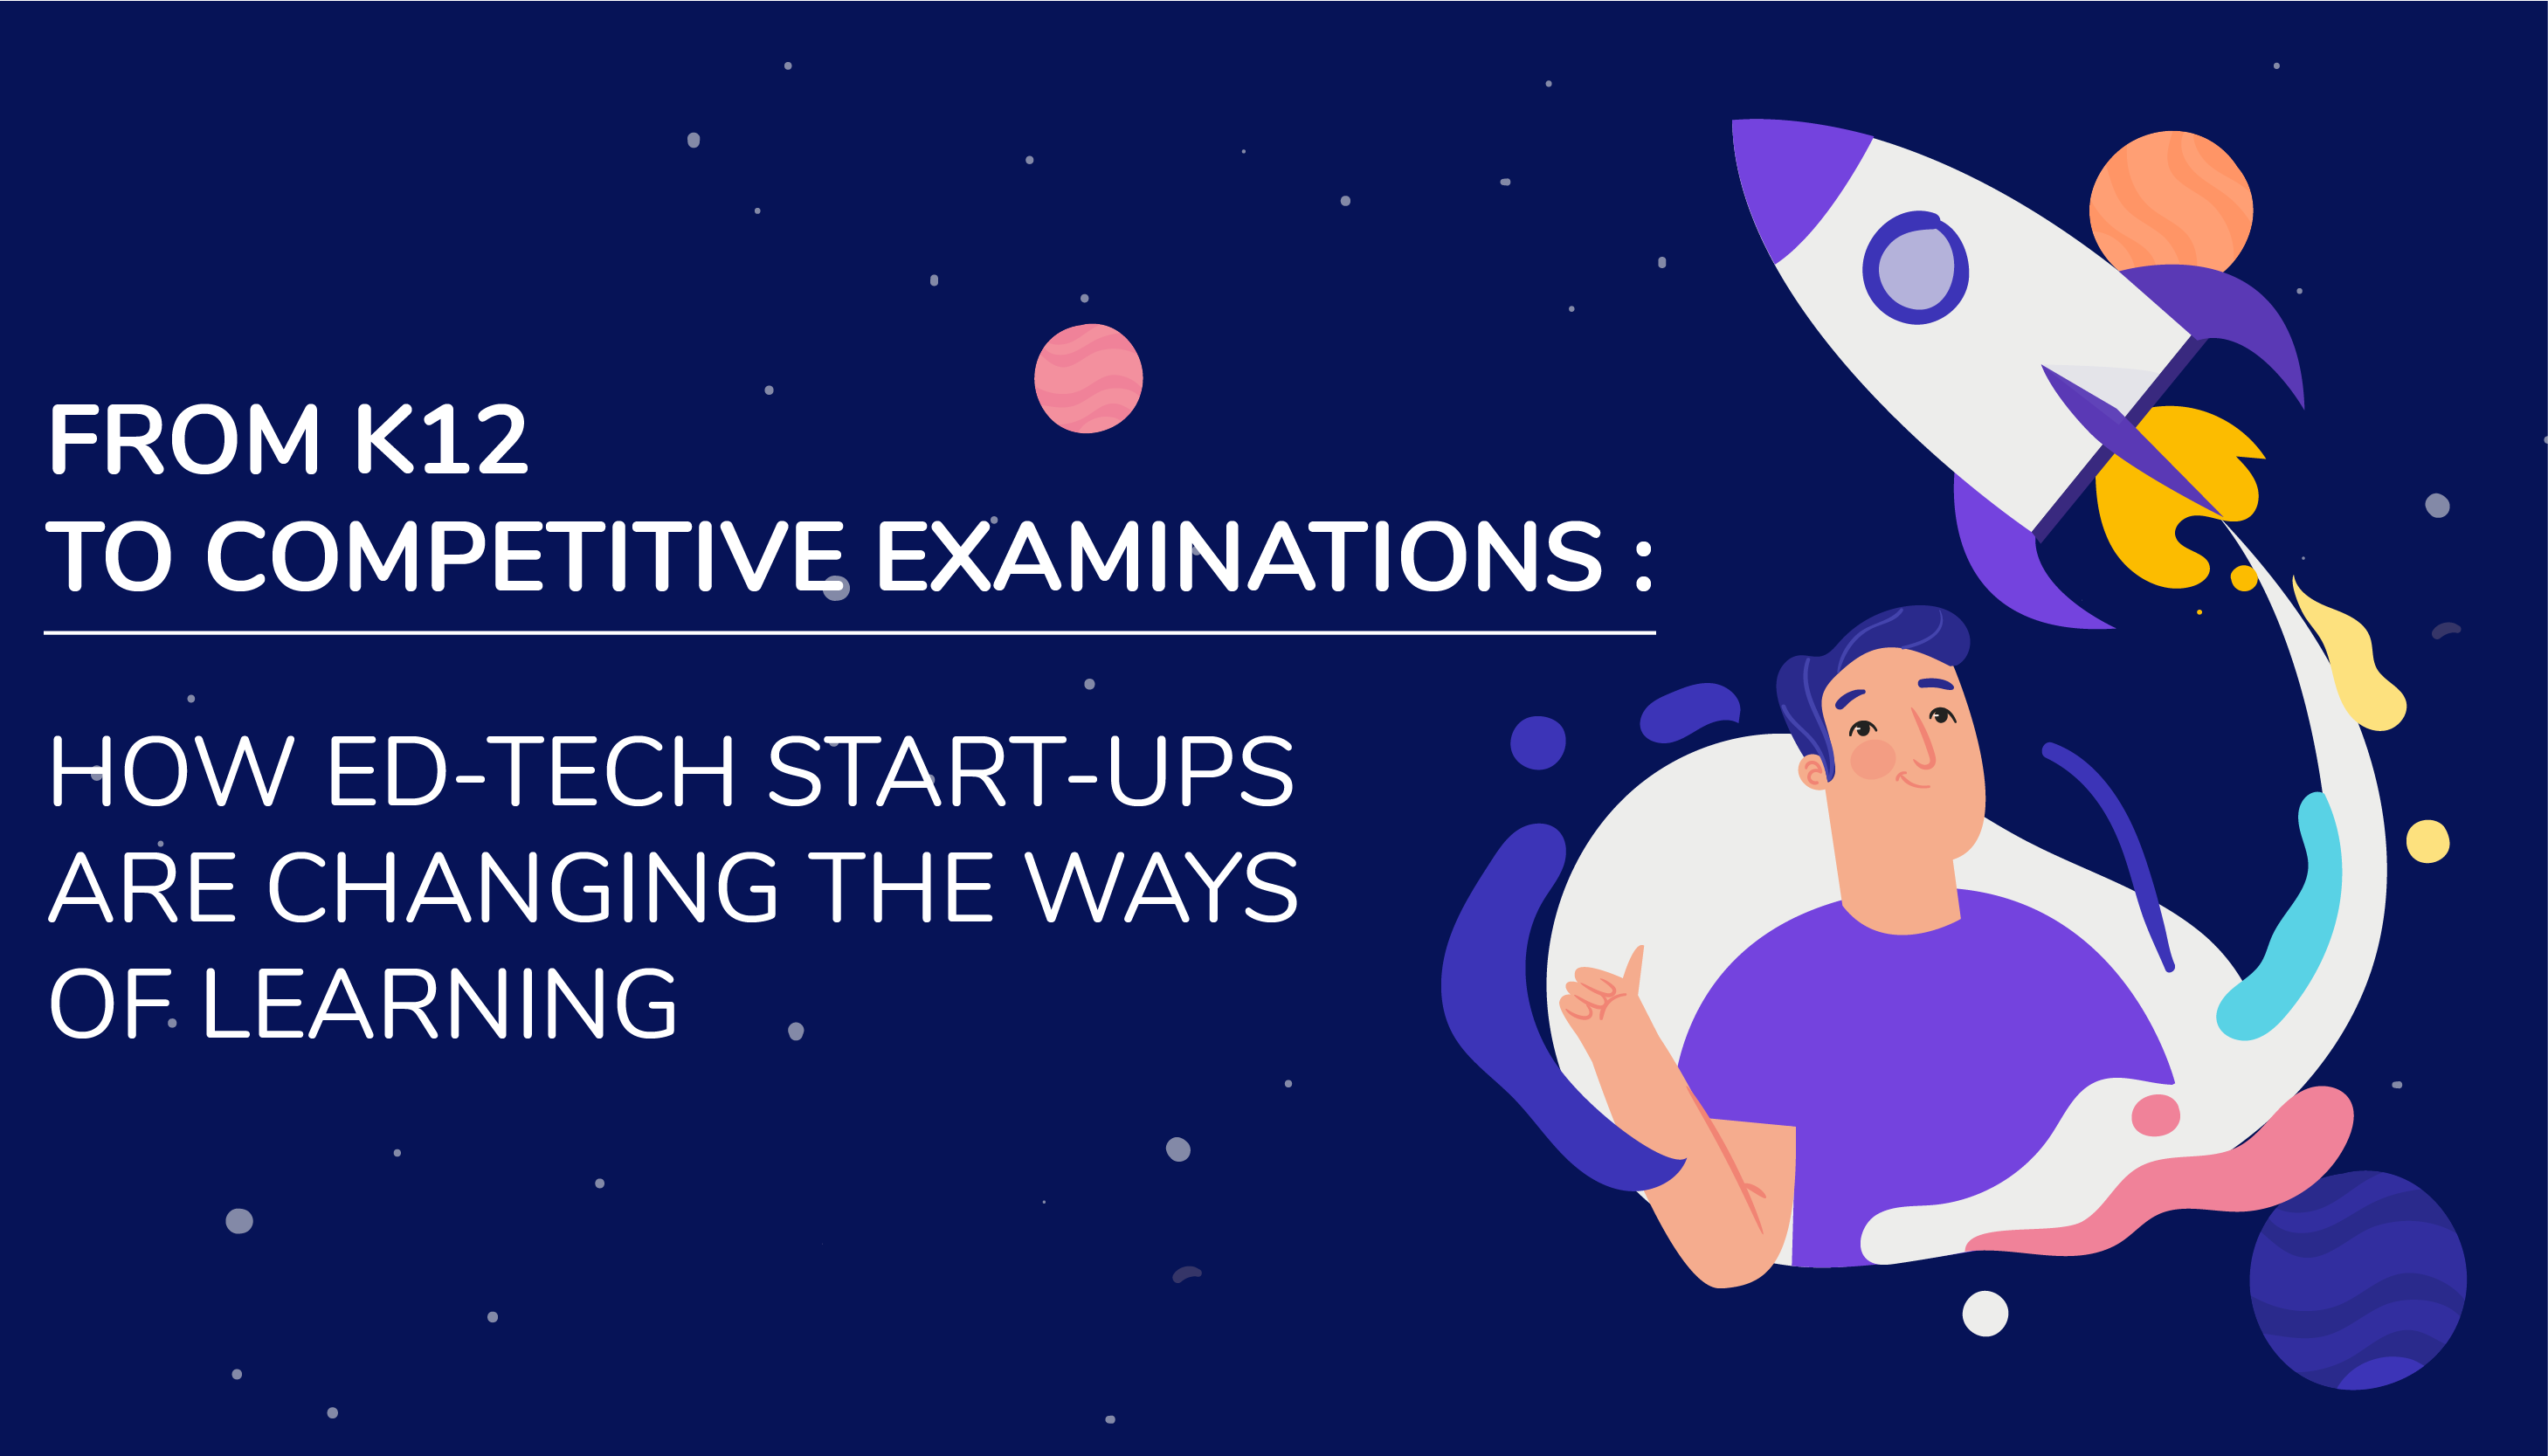 From K12 to competitive examinations: how Ed-tech Start-ups are changing the ways of learning - Edukit